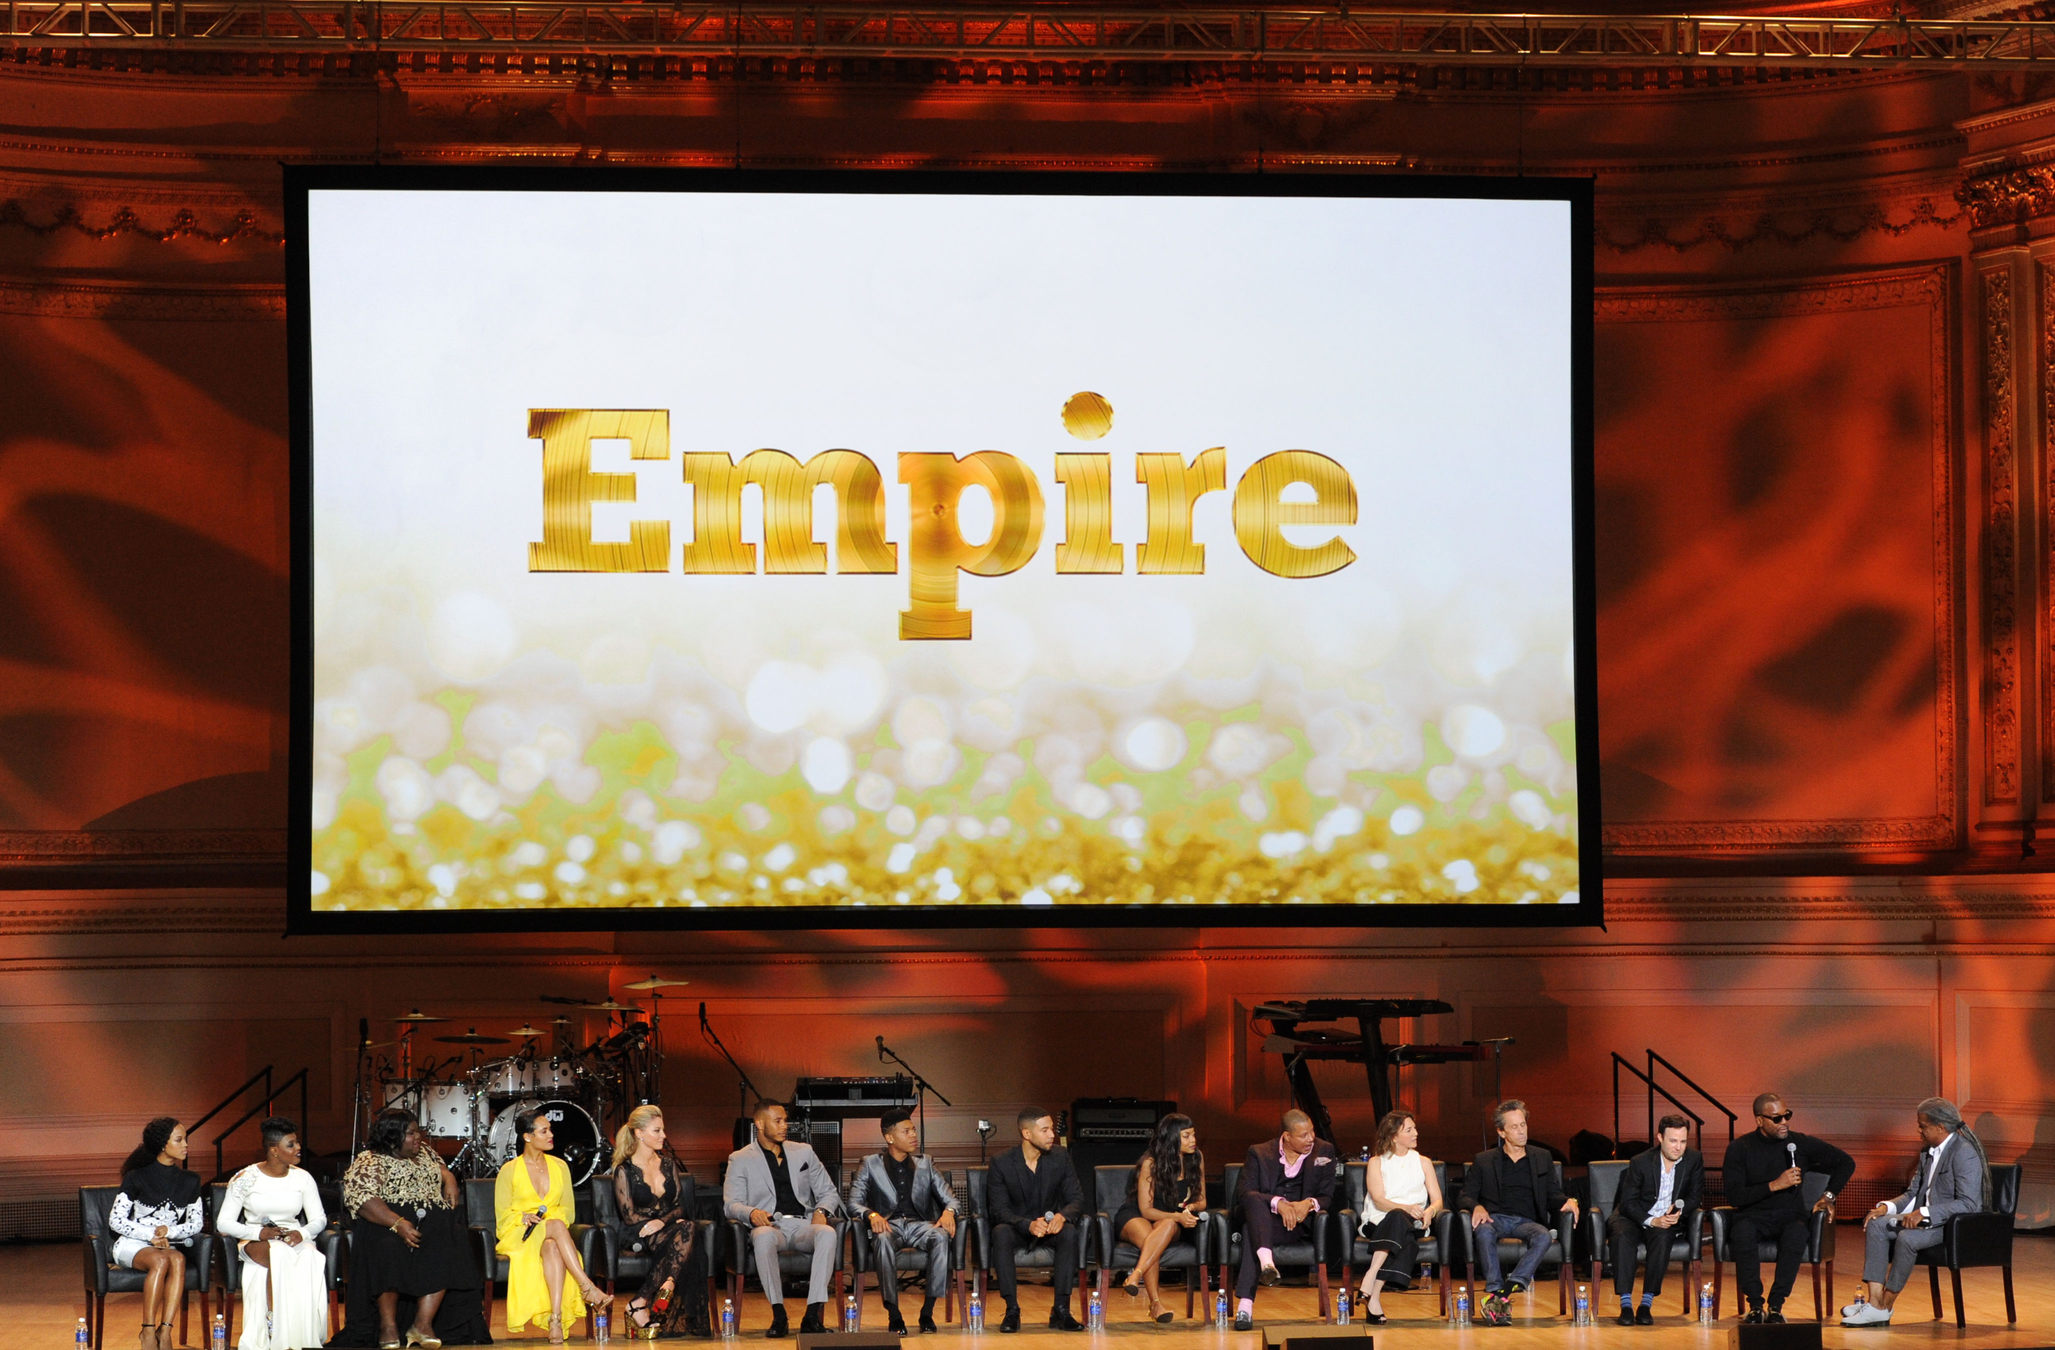 EMPIRE: EMPIRE Cast members Serayah McNeill, Ta 'Rhonda Jones, Gabourey Sidibe, Grace Gealey, Kaitlin Doubleday, Trai Byers, Bryshere "Yazz" Grey, Jussie Smollett, Taraji P. Henson and Terrence Howard and Executive Producers Ilene Chaiken, Brian Grazer, Danny Strong and Lee Daniels, and moderator Elvis Mitchell during the Q&A at the EMPIRE Season Two season premiere event at Carnegie Hall on Saturday, Sept. 12 in New York, NY. Season Two premieres Wednesday, Sept. 23 (9:00-10:00 PM ET/PT) on FOX. © 2015 FOX BROADCASTING CR: Frank Micelotta/FOX